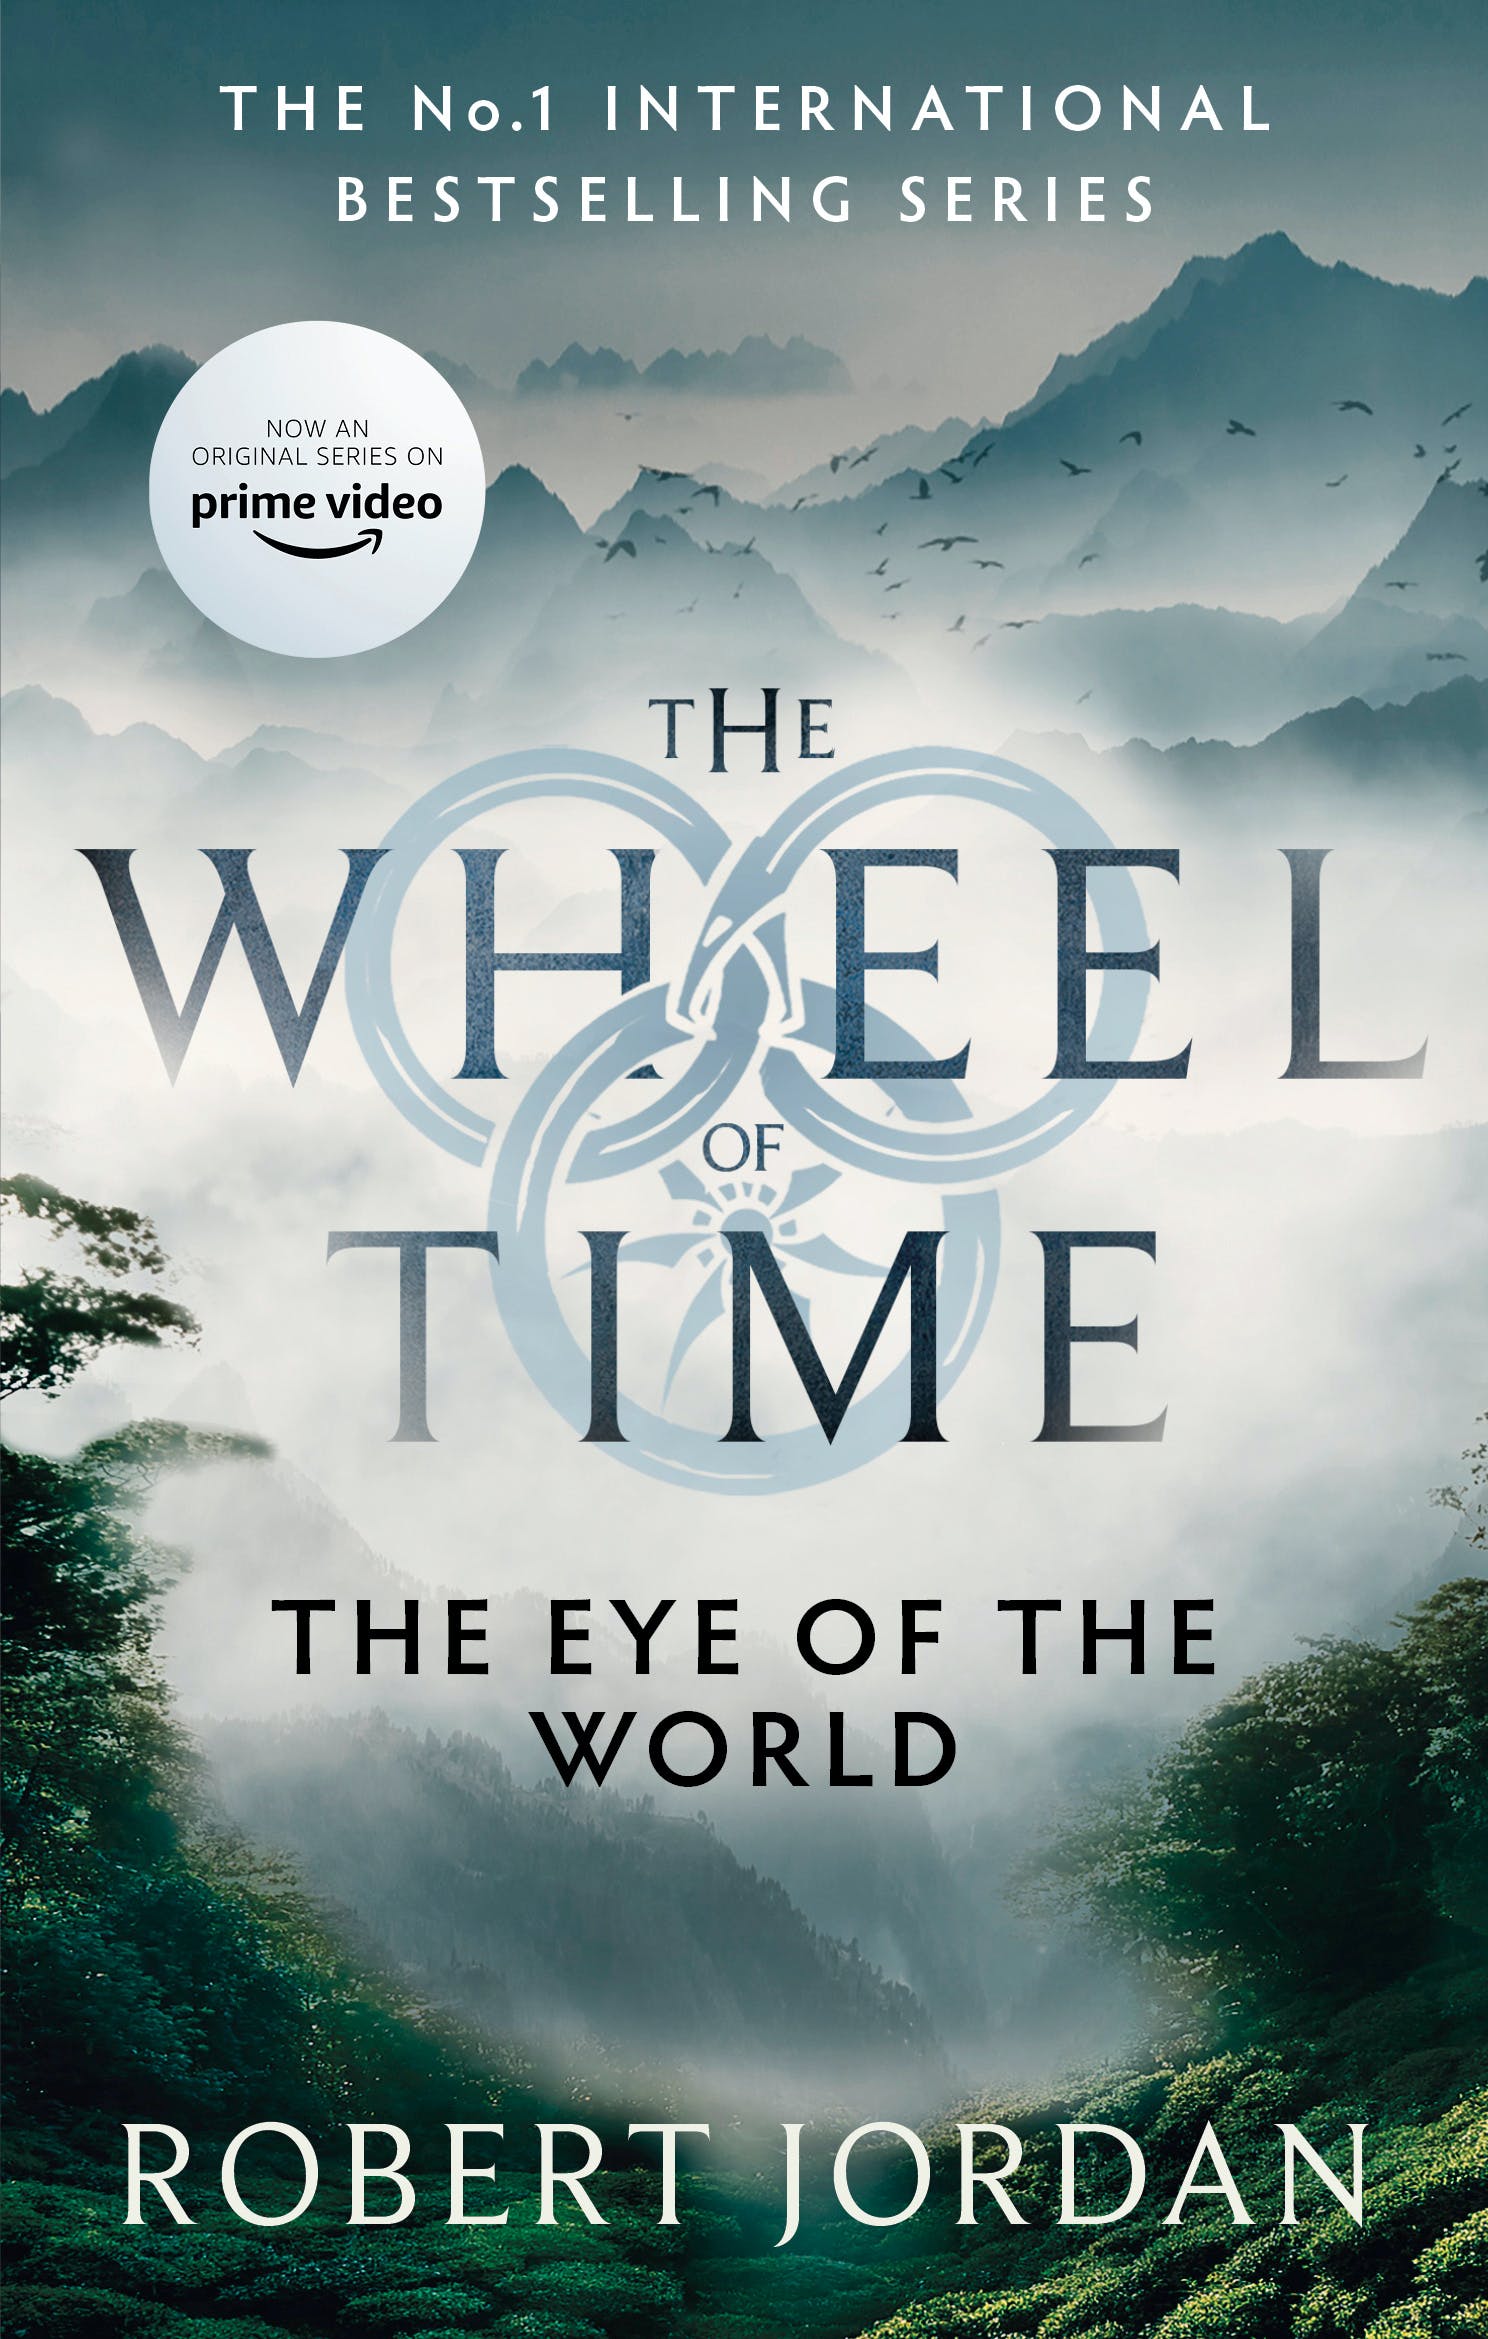 THE WHEEL OF TIME 1: THE EYE OF THE WORLD - TIE IN